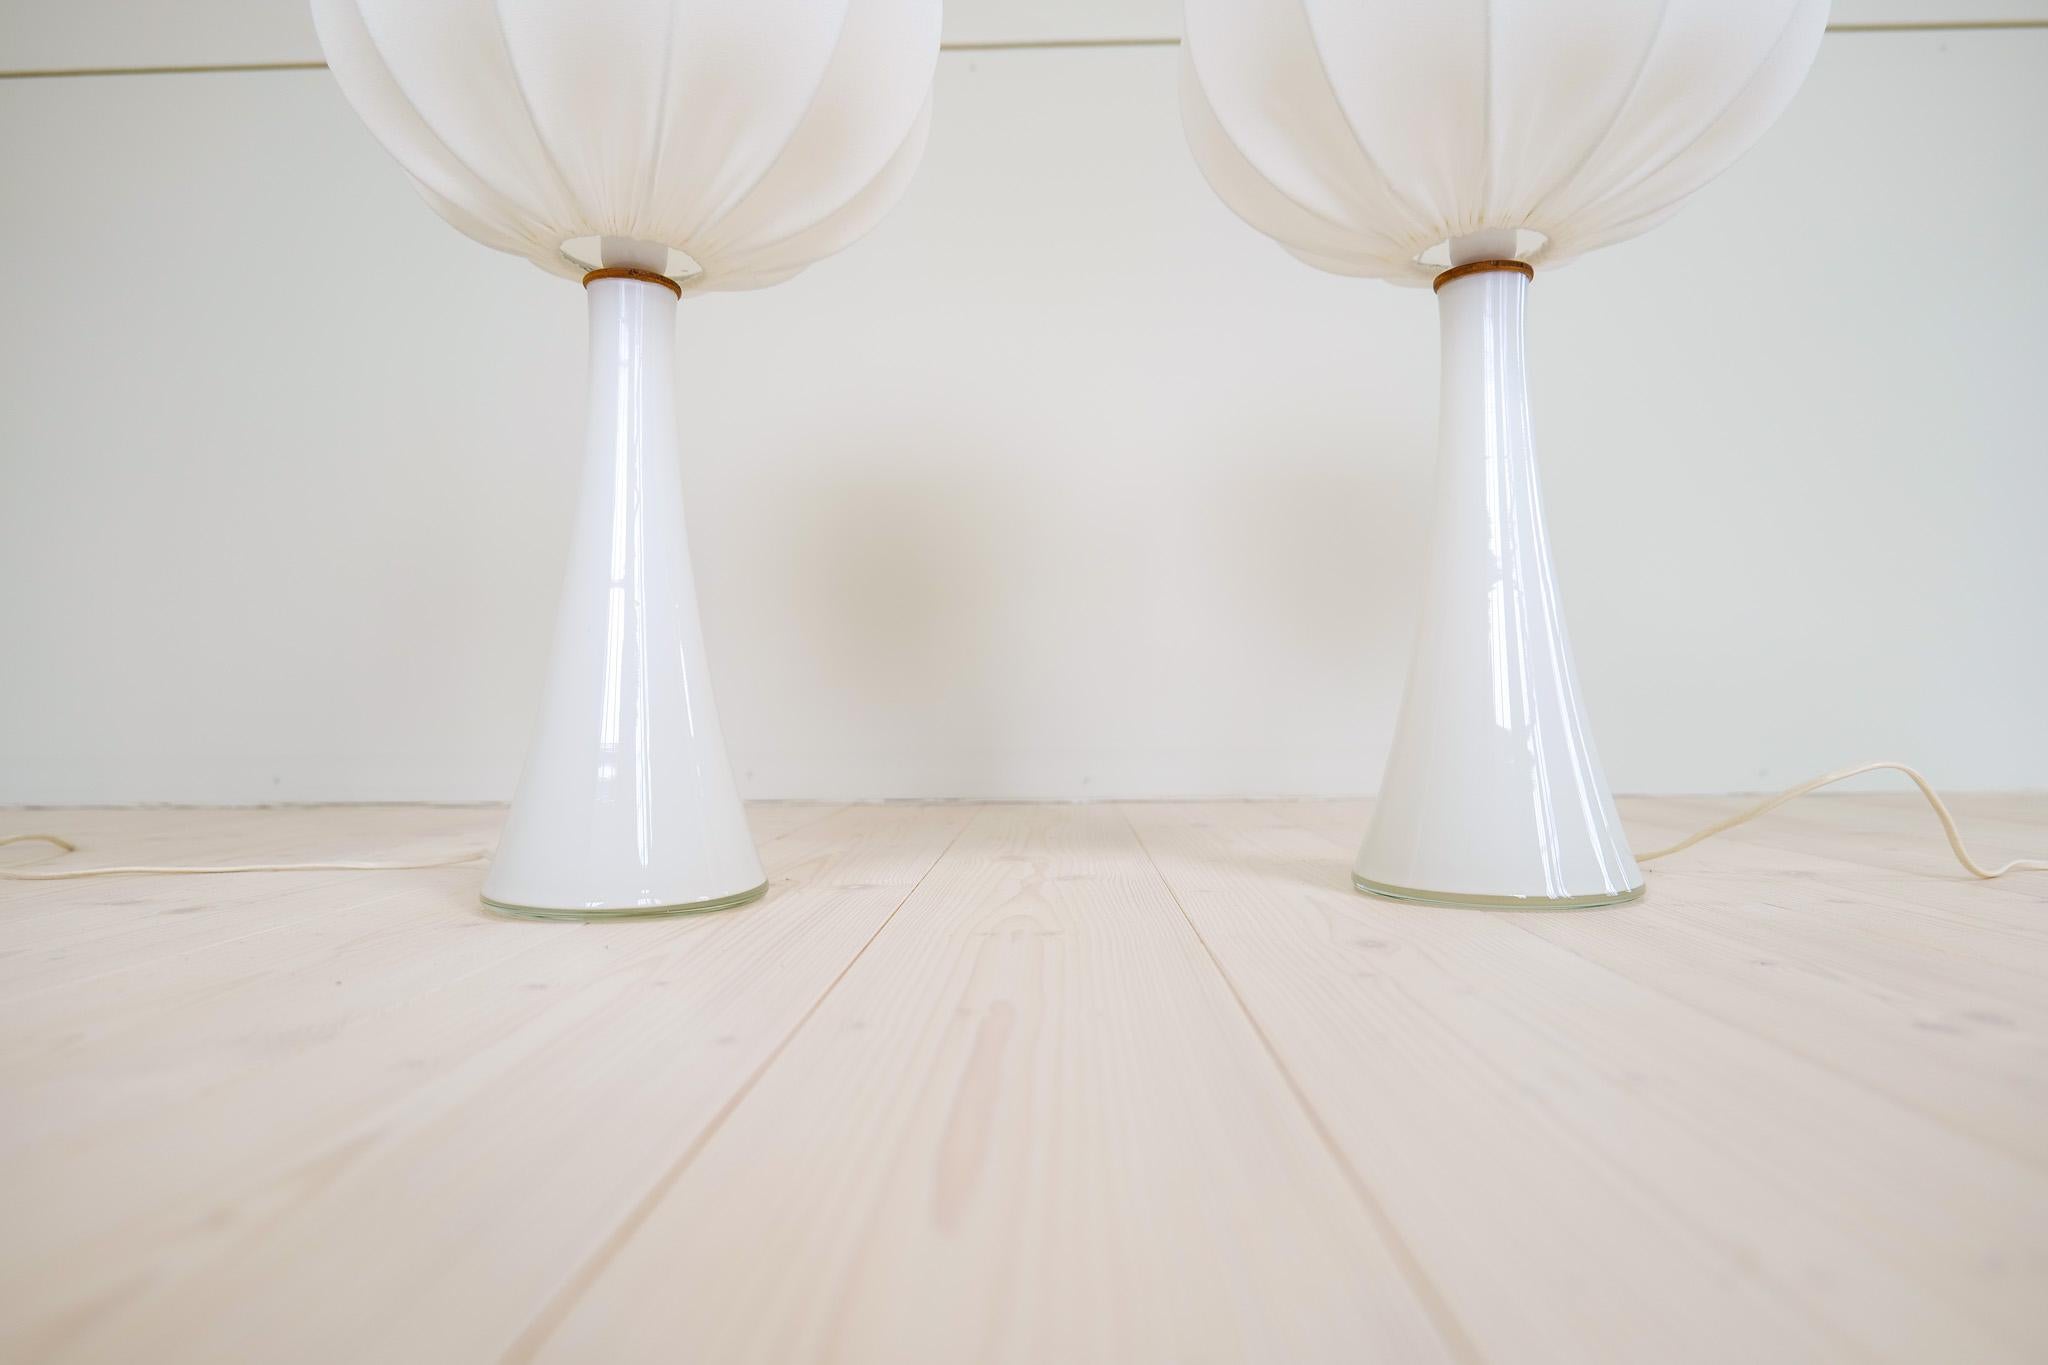 Midcentury Pair of Opaline Glass Table Lamps Cotton Shades Bergboms Sweden, 1960 For Sale 1